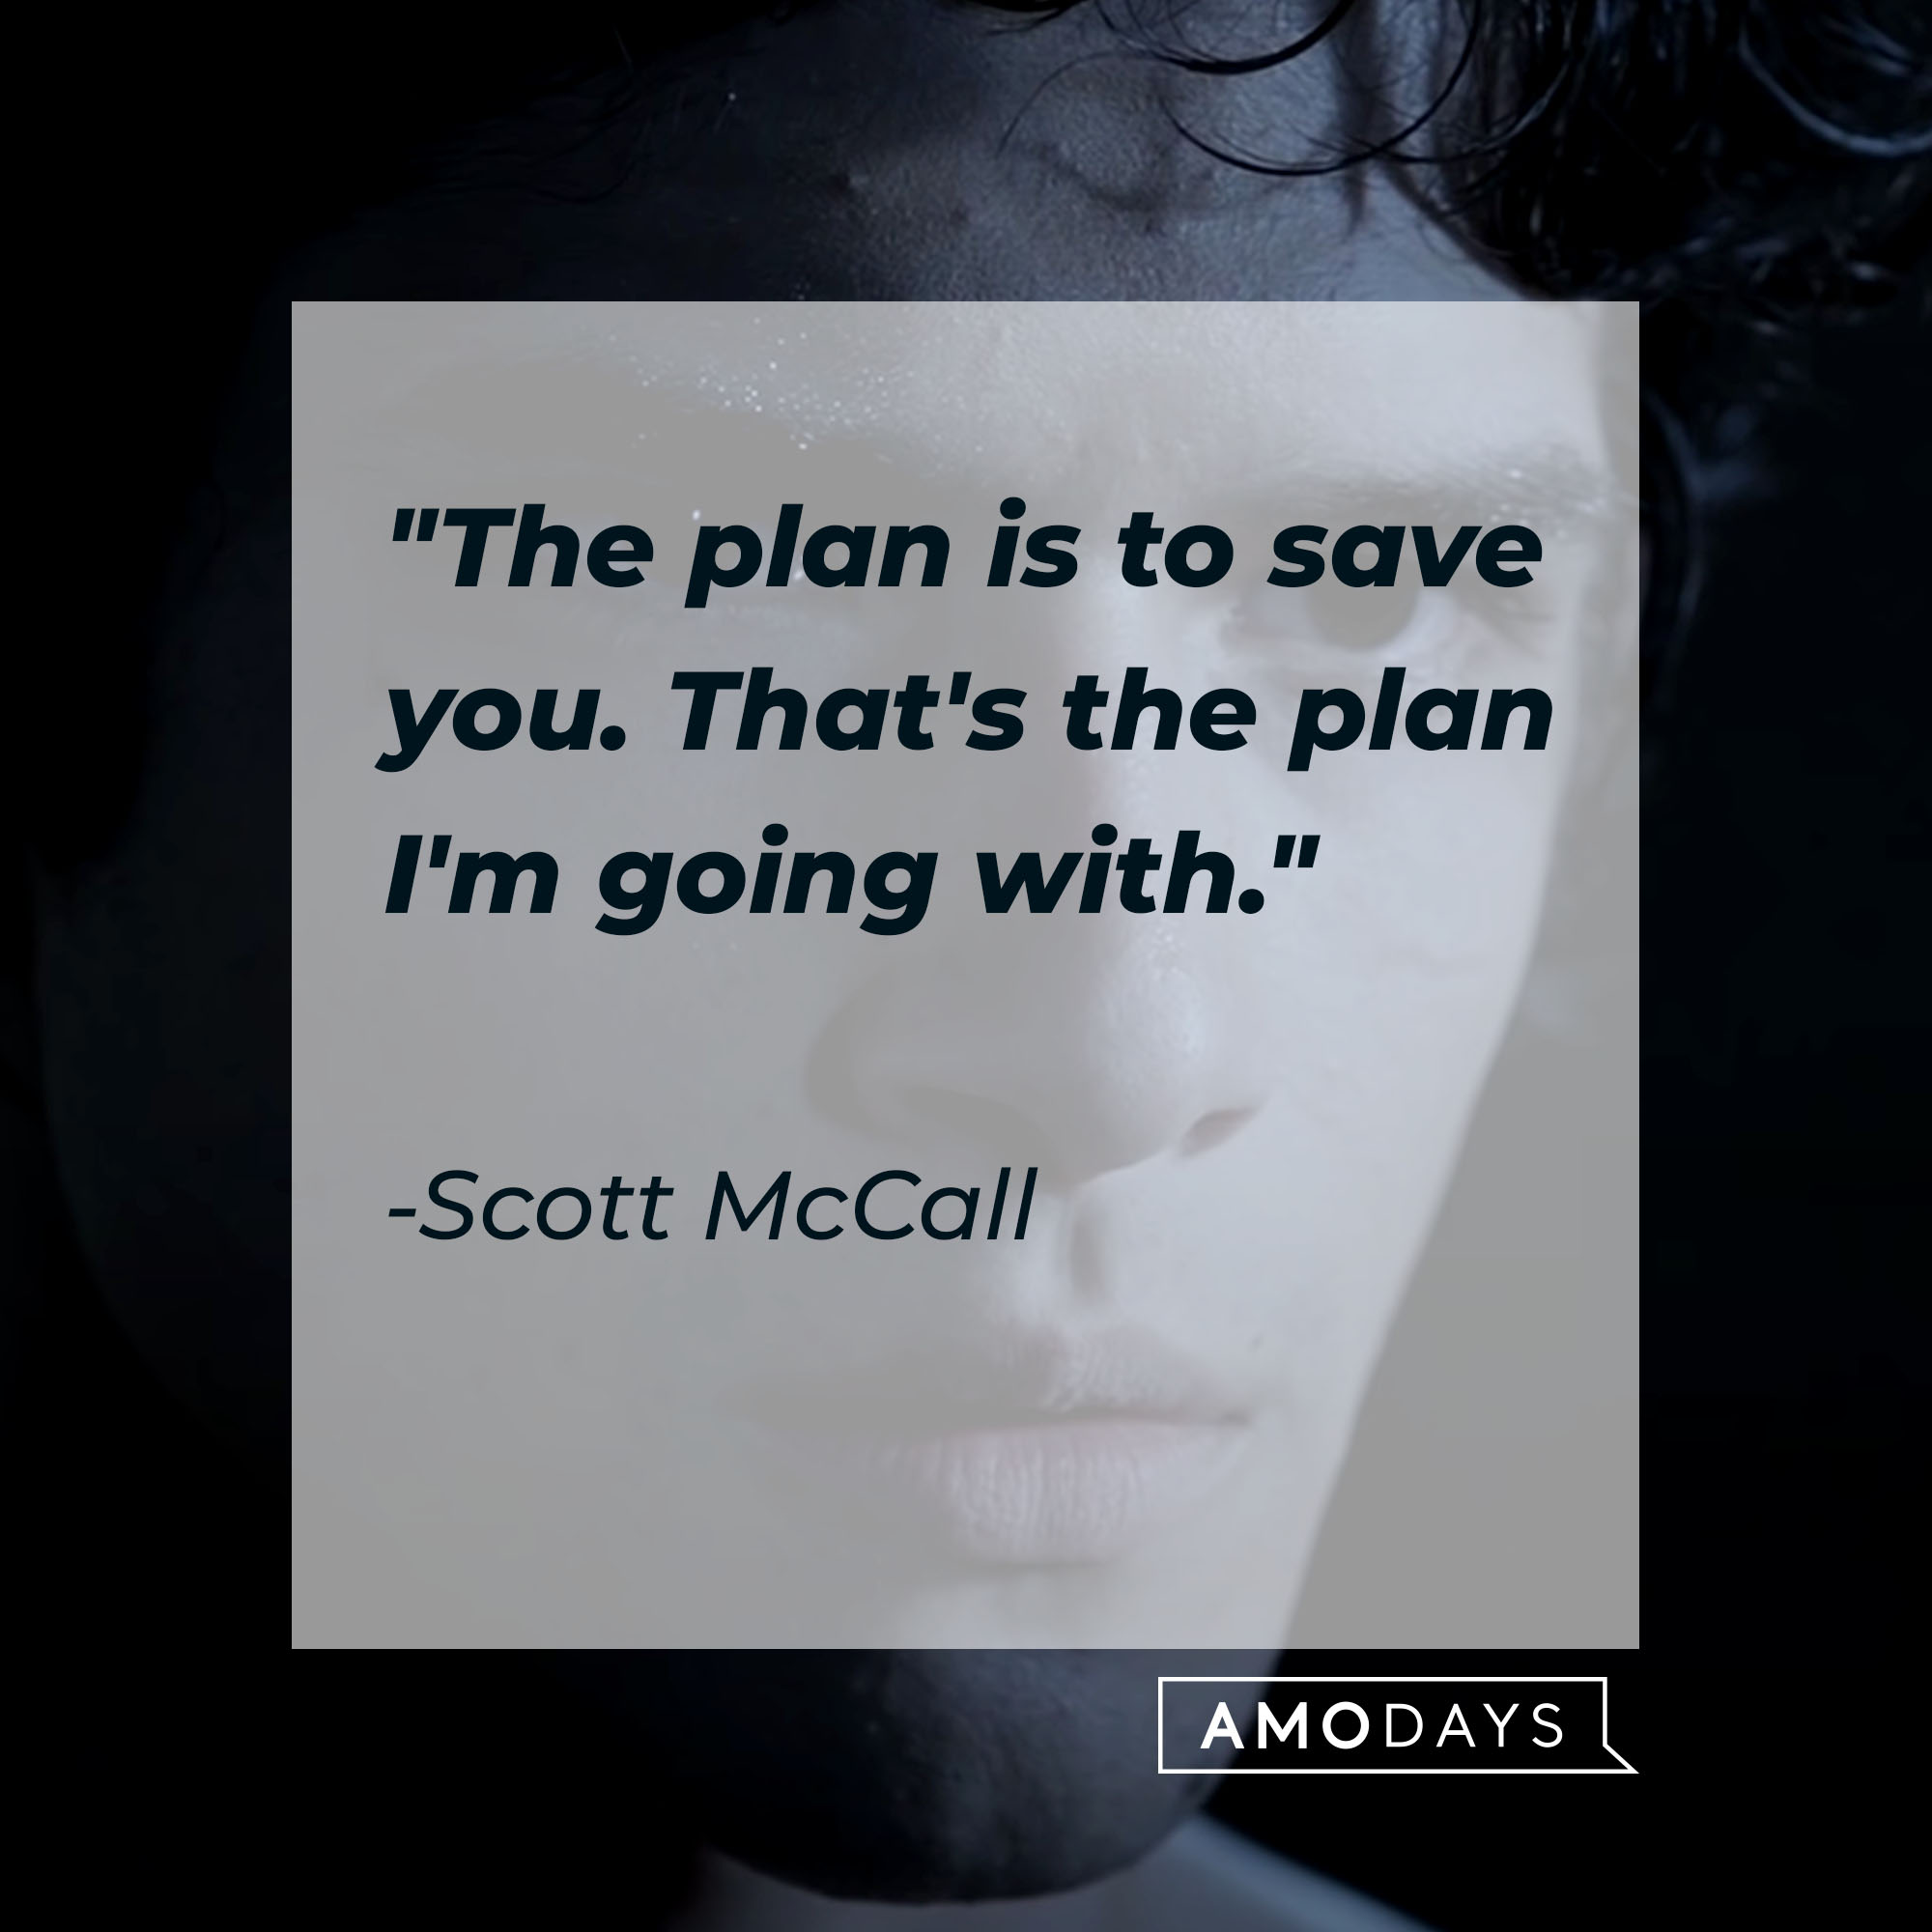 Scott McCall's quote: "The plan is to save you. That's the plan I'm going with" | Source: Youtube.com/WolfWatch